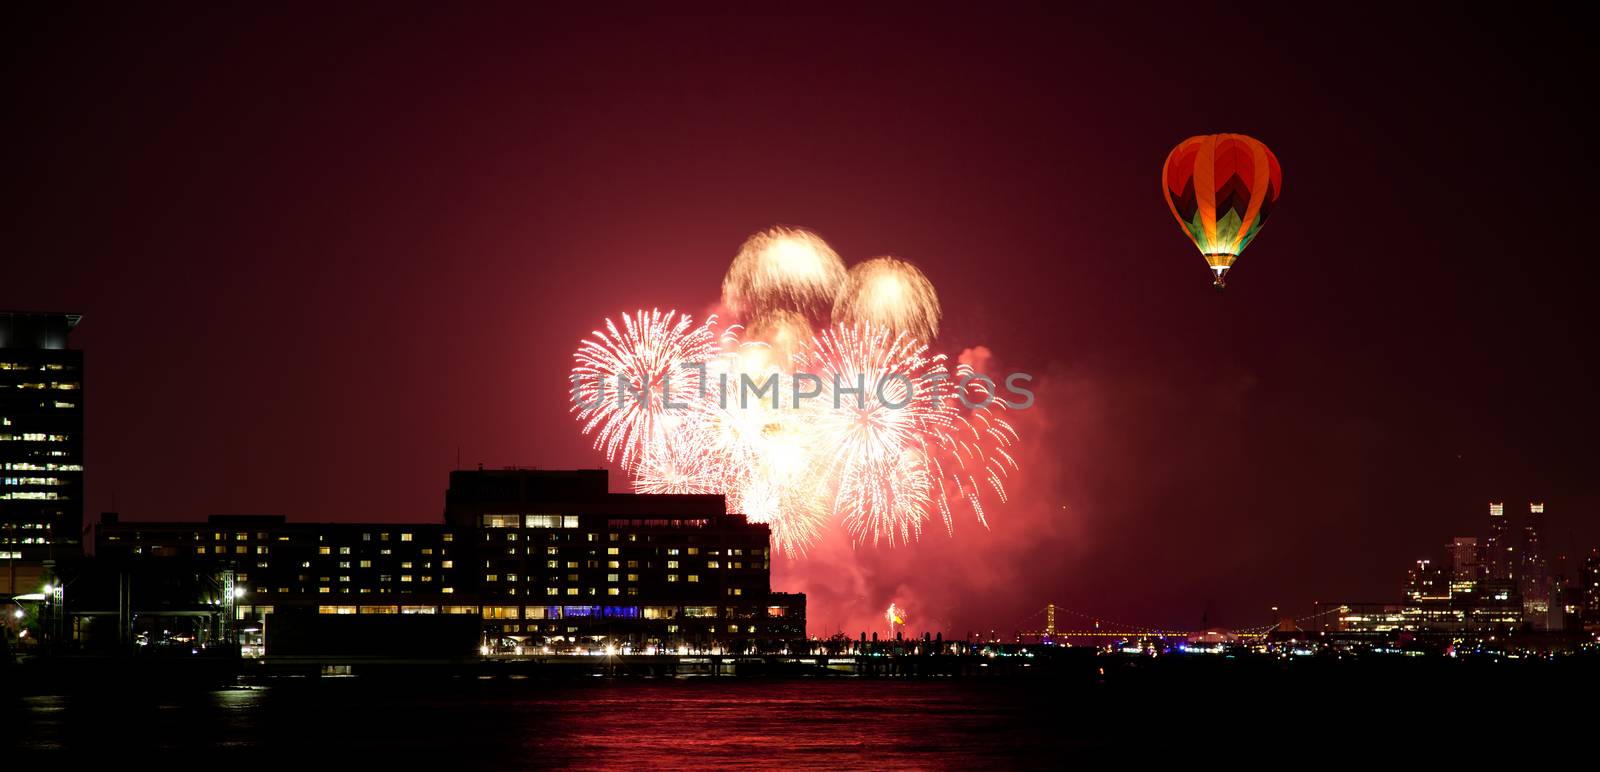 The 4th of July fireworks over the Hudson River